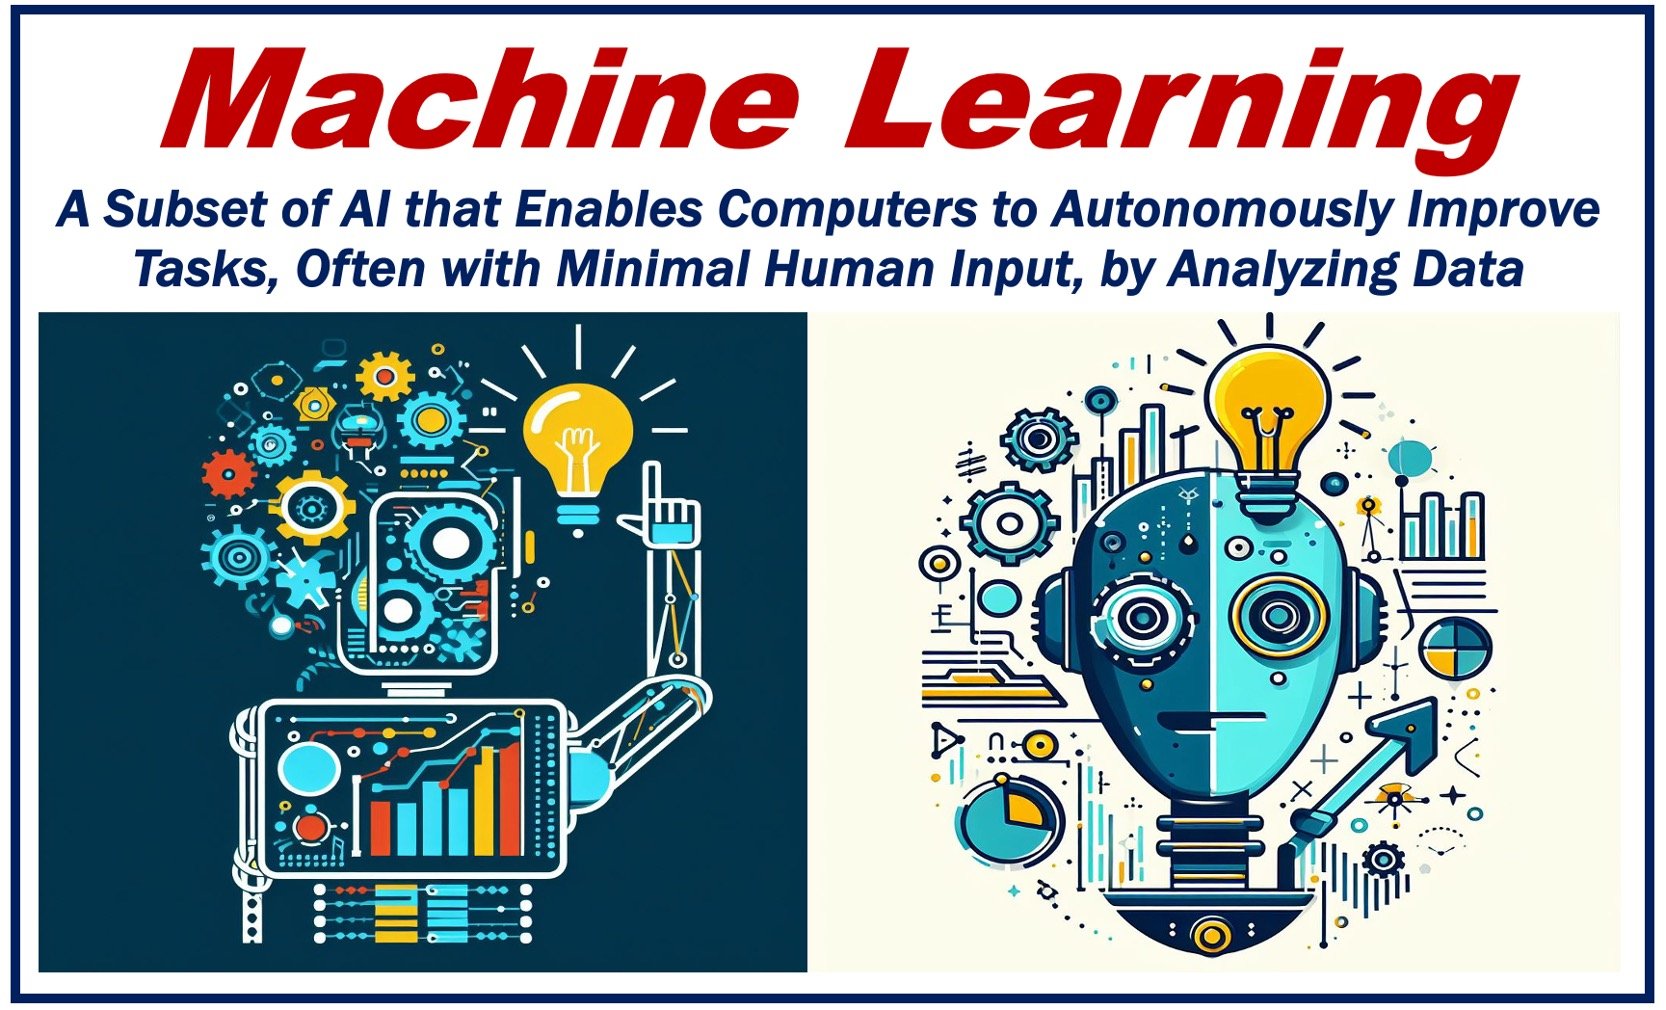 Two images of robots and components plus a definition of machine learning